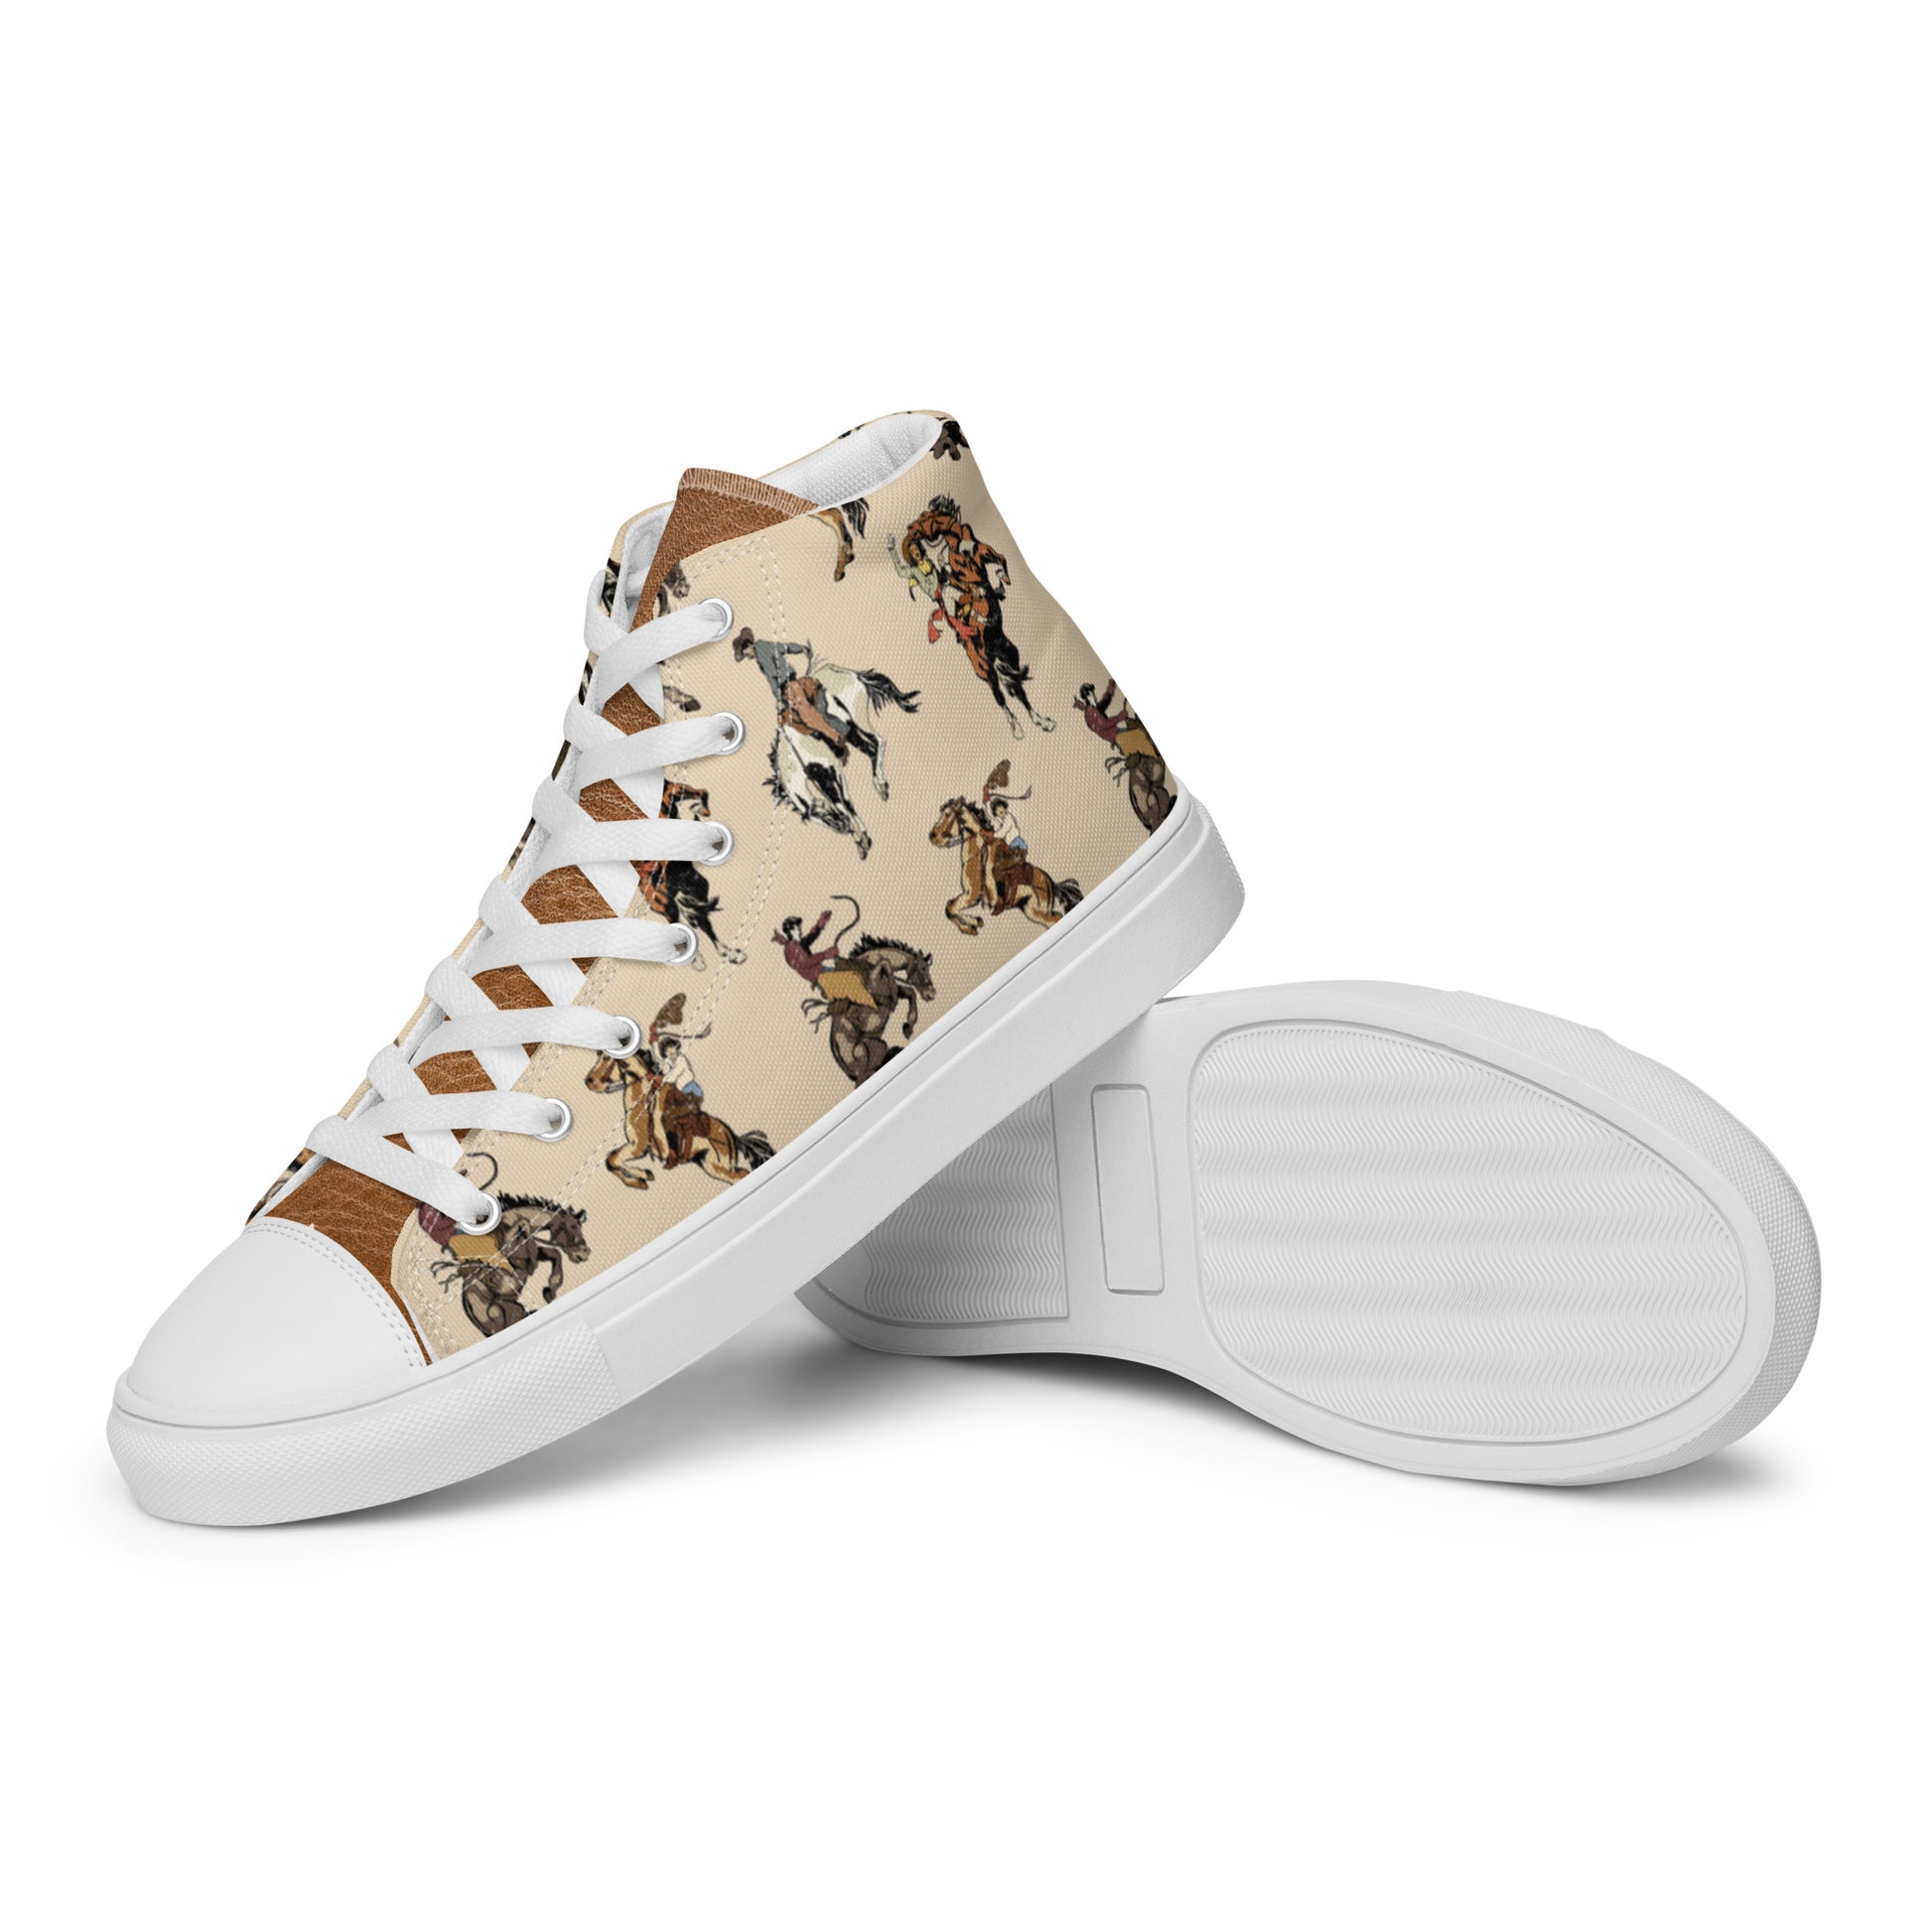 Vintage Cowgirl Women’s high top canvas shoes - baha ranch, canvas, cowgirl, high tops, hightop shoes, shoe, shoes, vintage, vintage cowgirl -  - Baha Ranch Western Wear